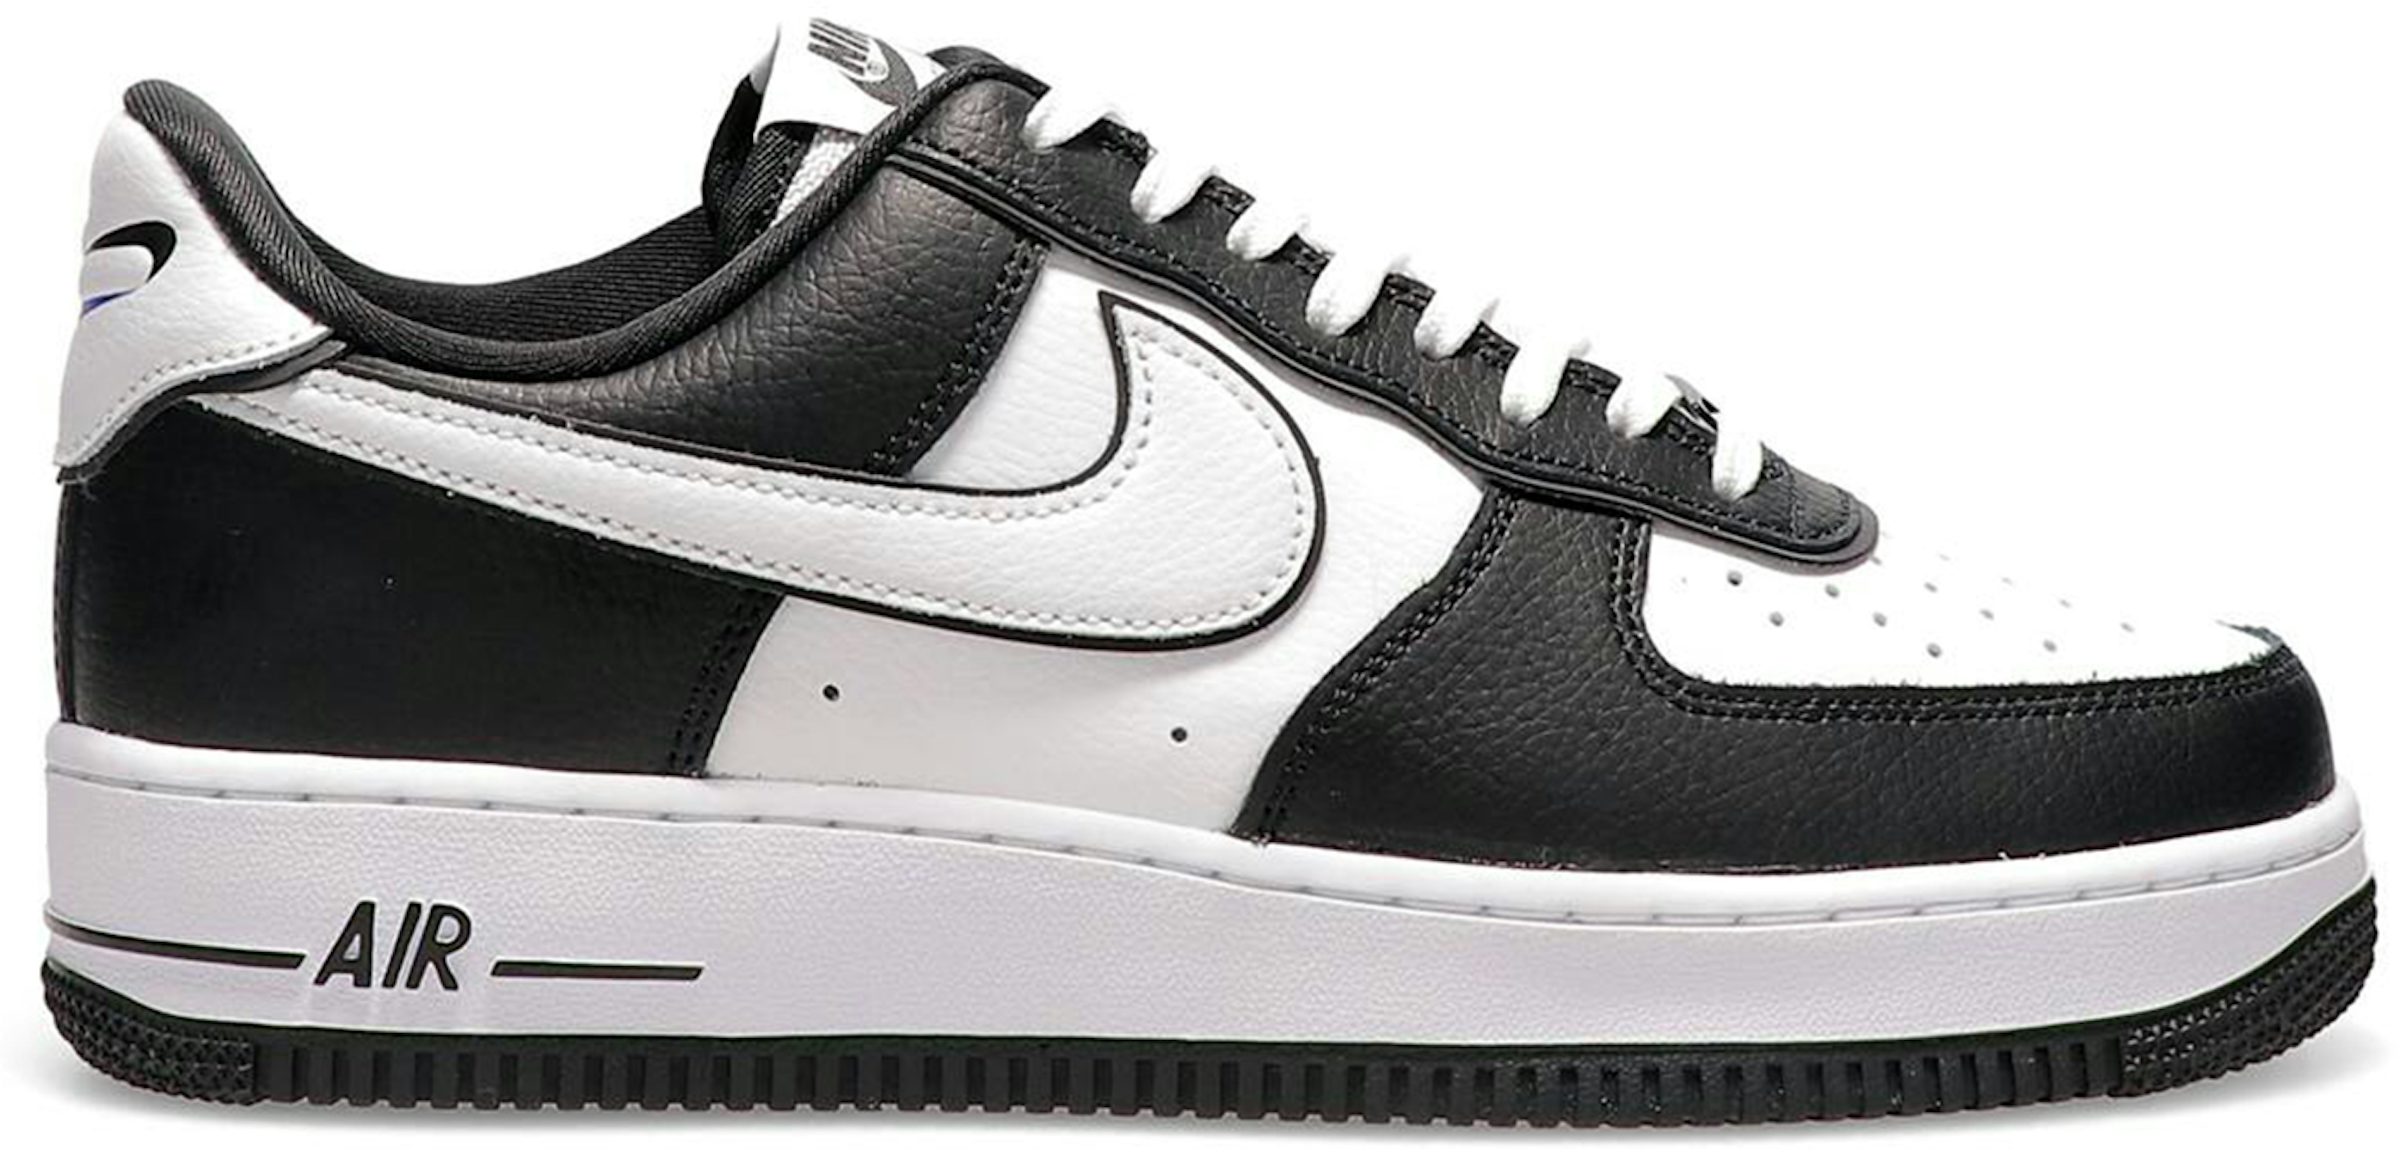 Nike Men's Air Force 1 '07 LV8 in Black | Size 8 | FD2592-002